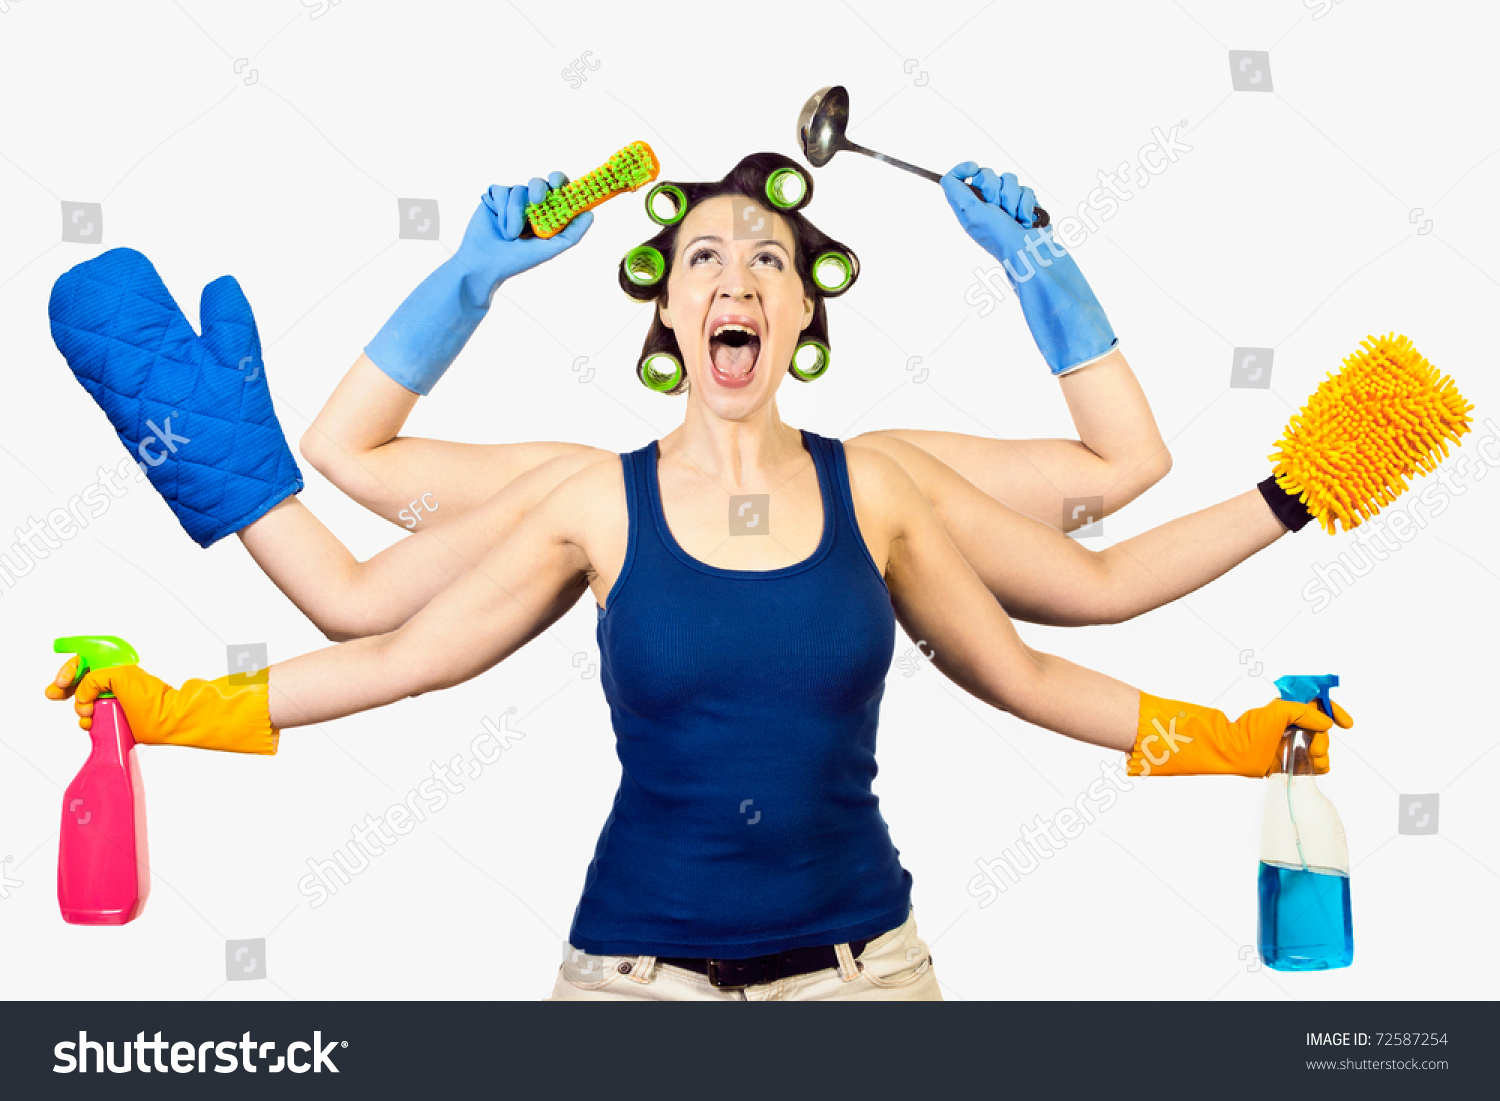 A woman in a domestic role multitasking her cleaning #72587254